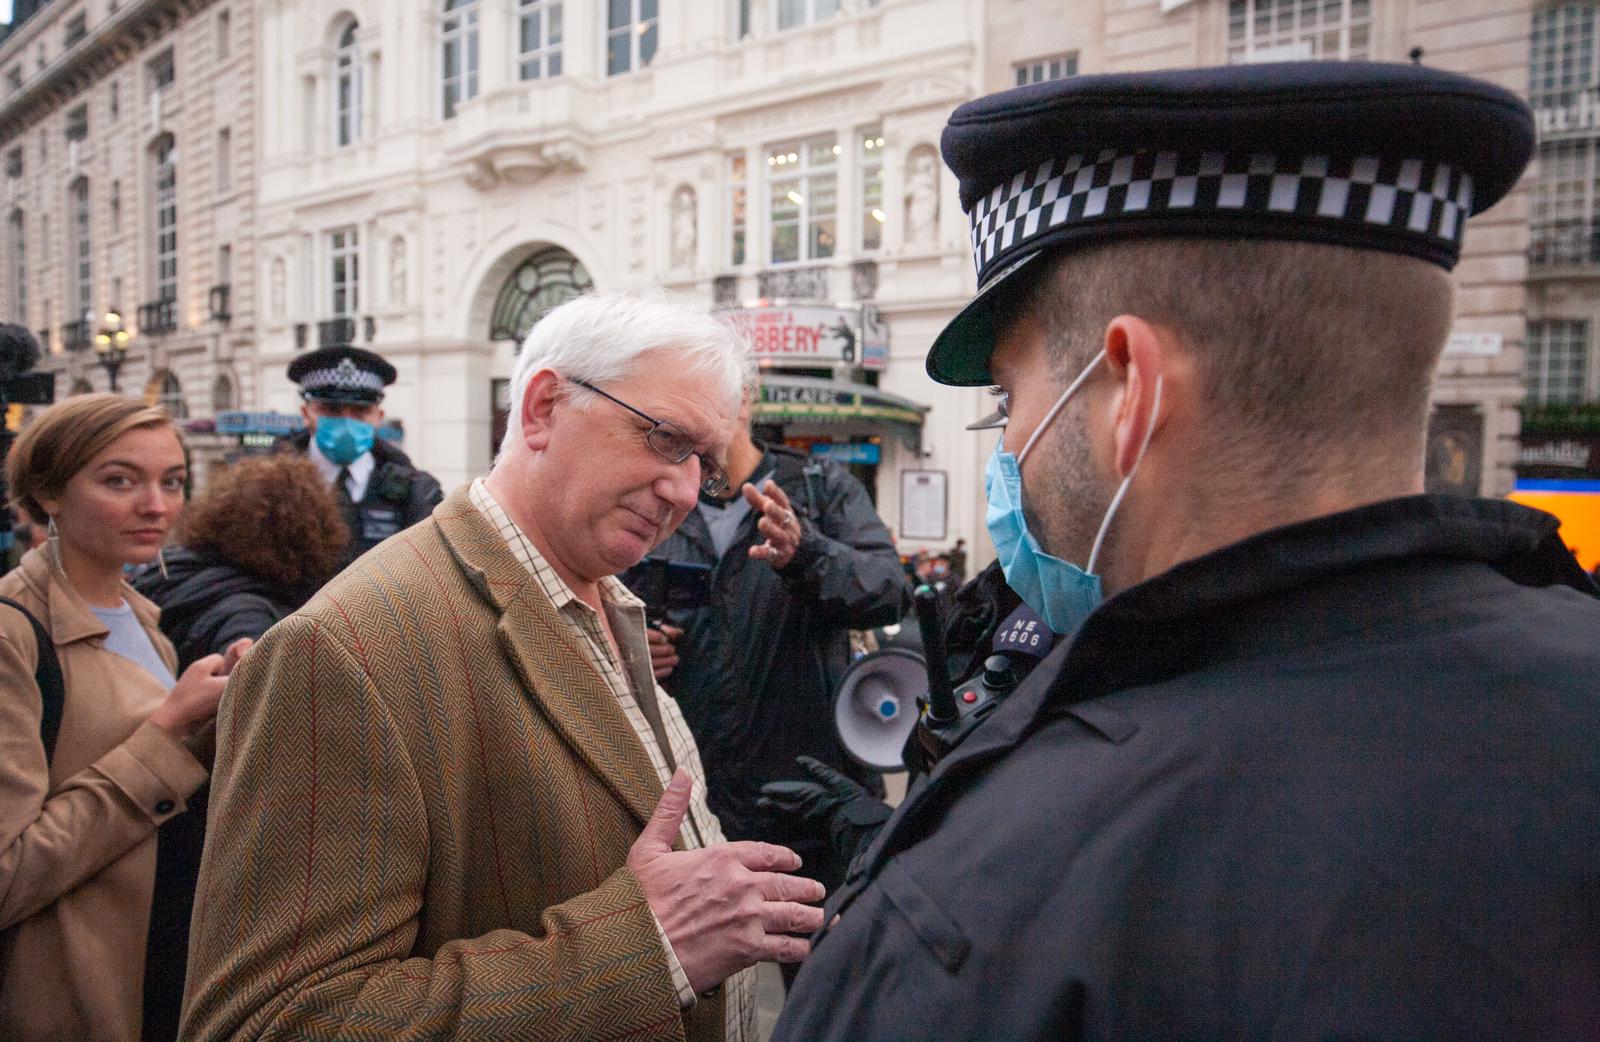 protest_photos:murray-diplomat-piccadilly-circus-london-3oct20.jpg